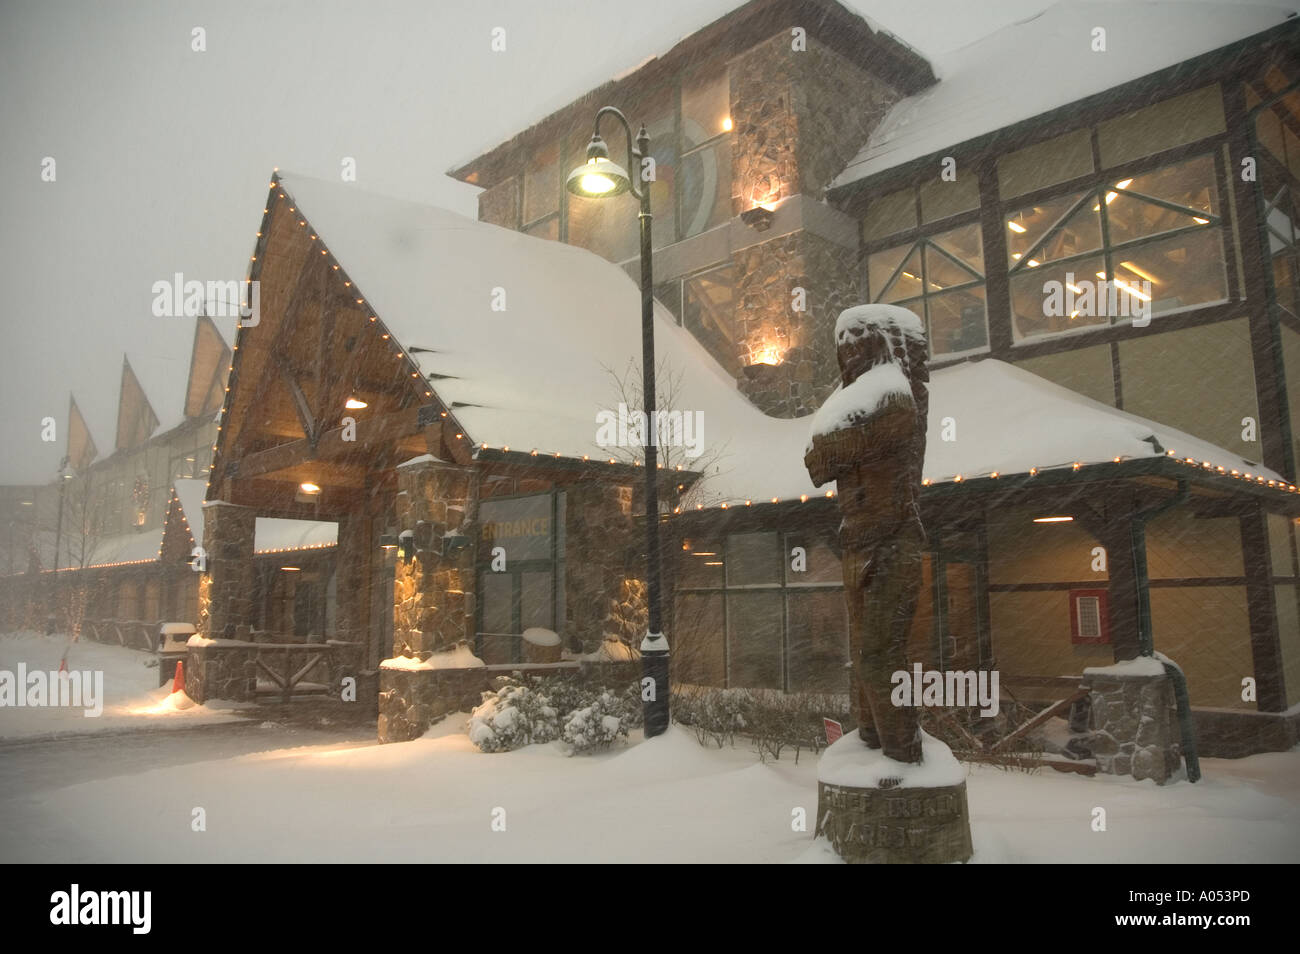 Heavy snow falls at the kittery Trading Post in Kittery, Maine. Stock Photo